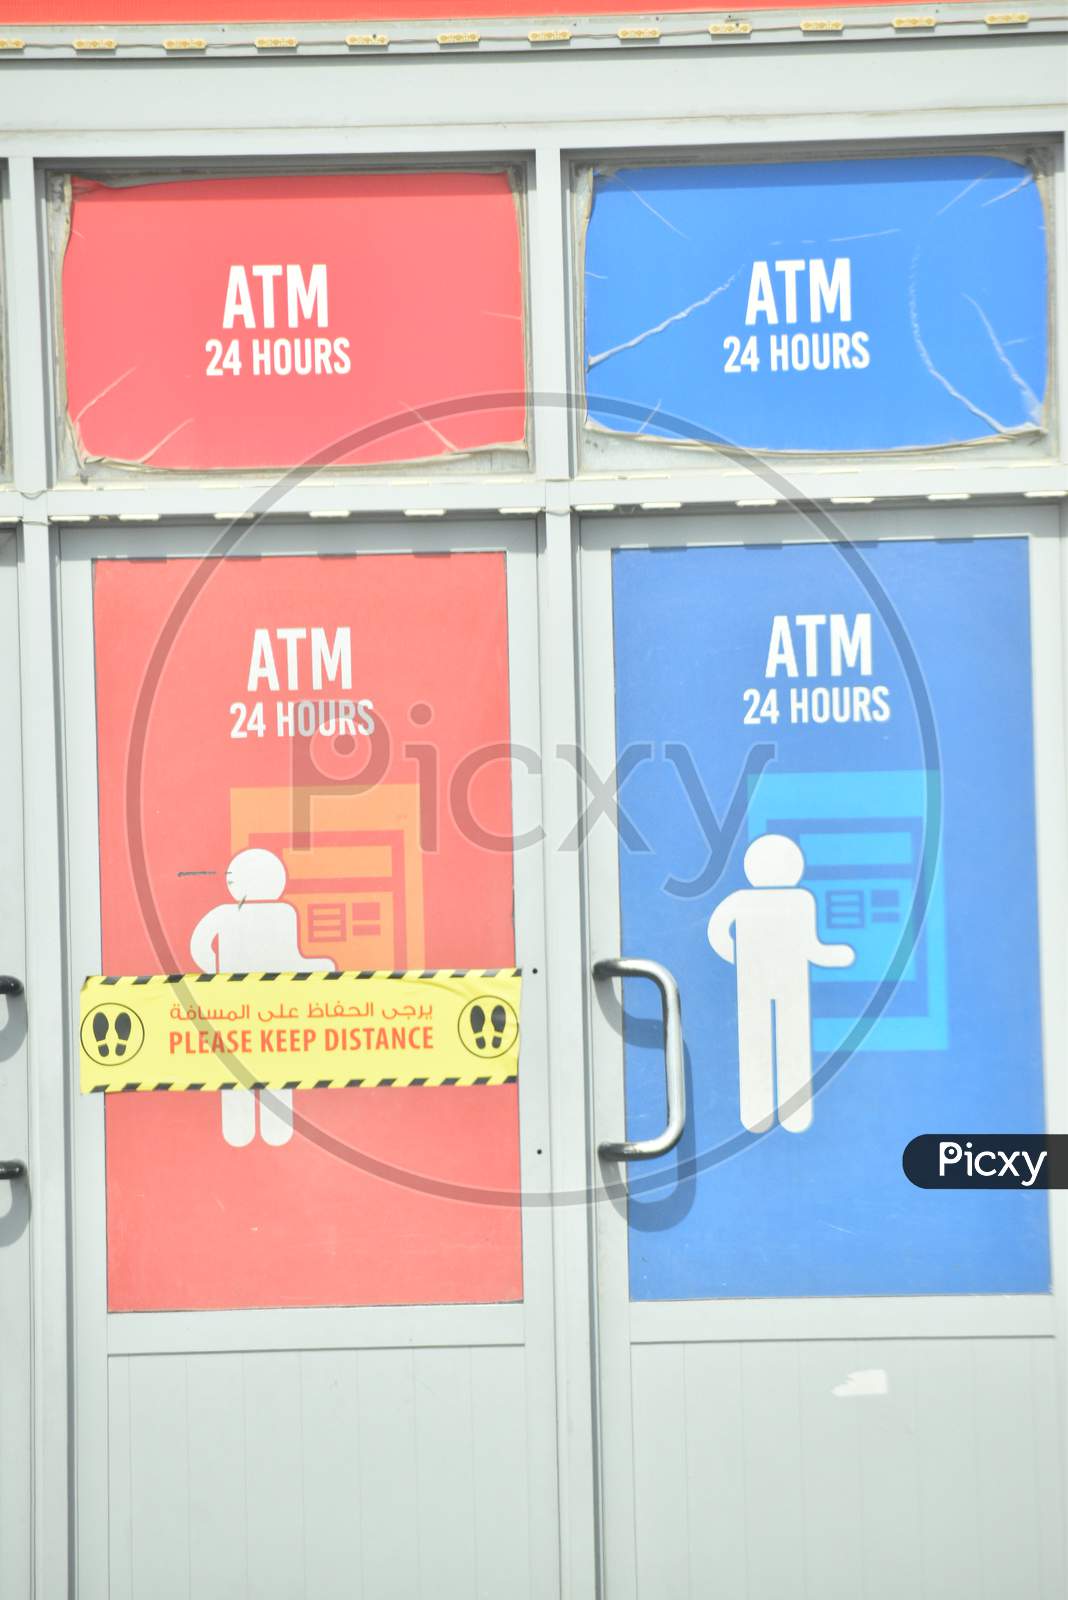 Red And Blue Painted Atm Counter .